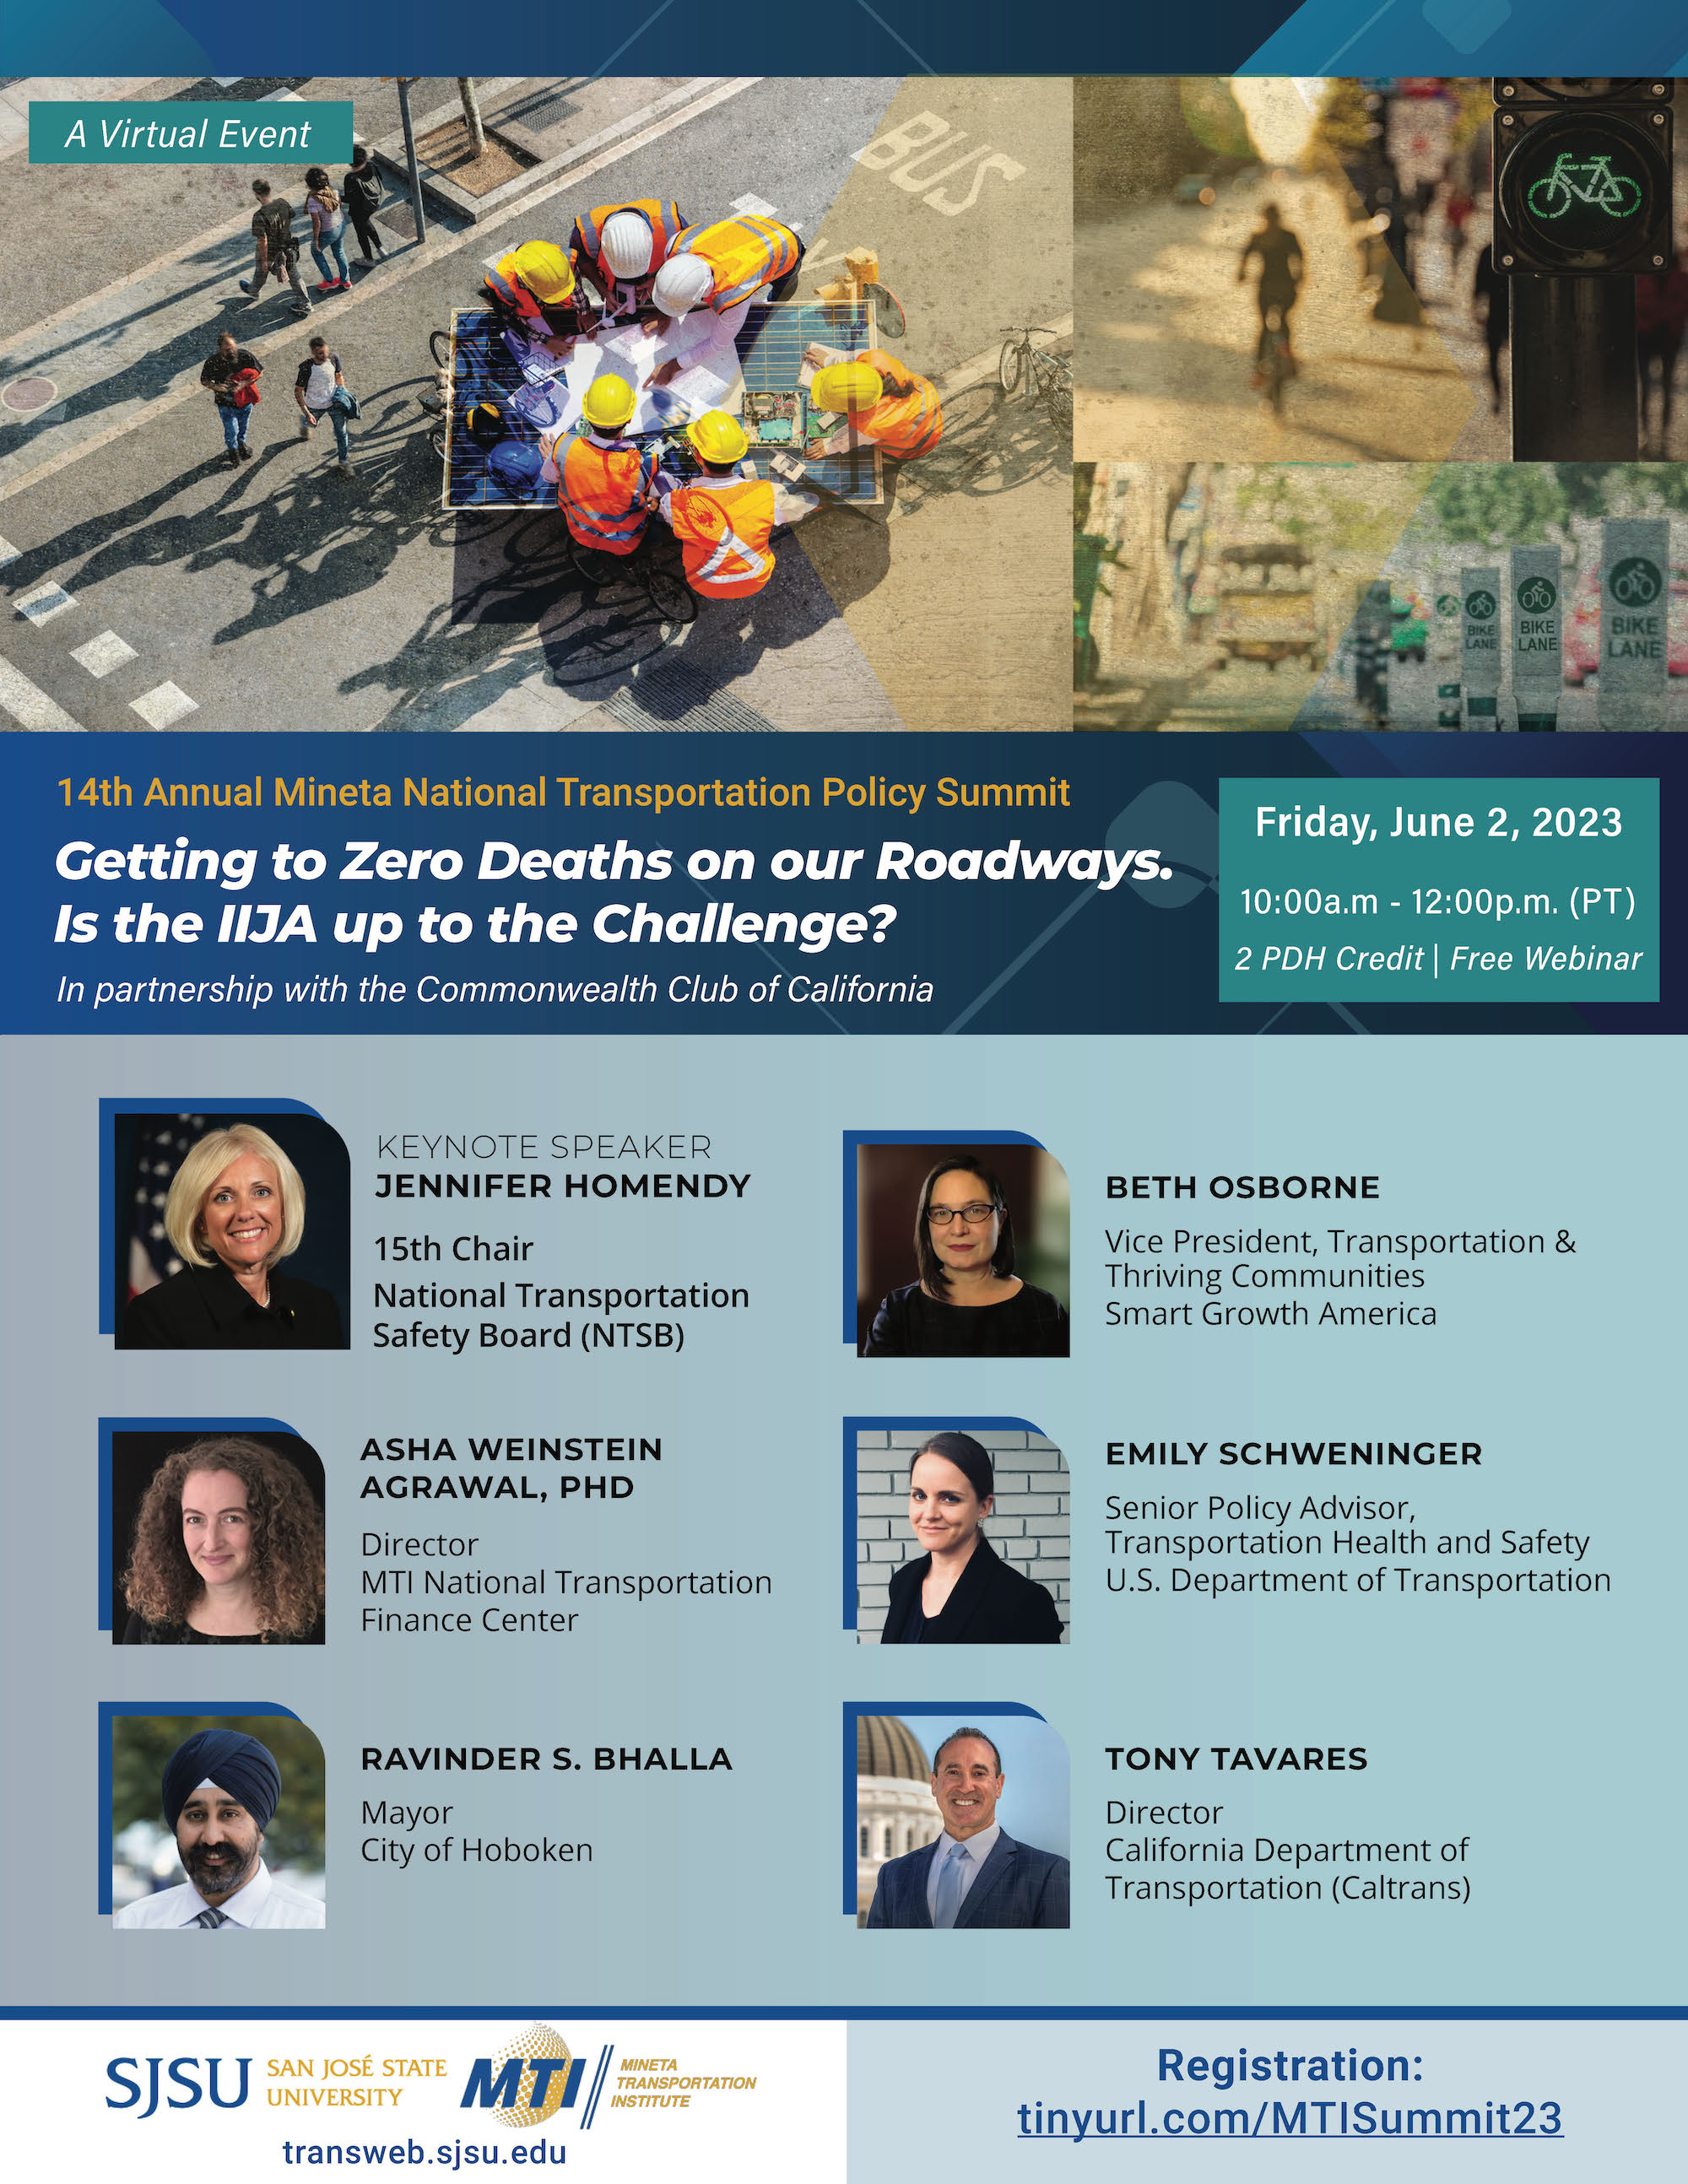 Webinar: Getting to Zero Deaths on Our Roadways. Is the IIJA up to the Challenge?